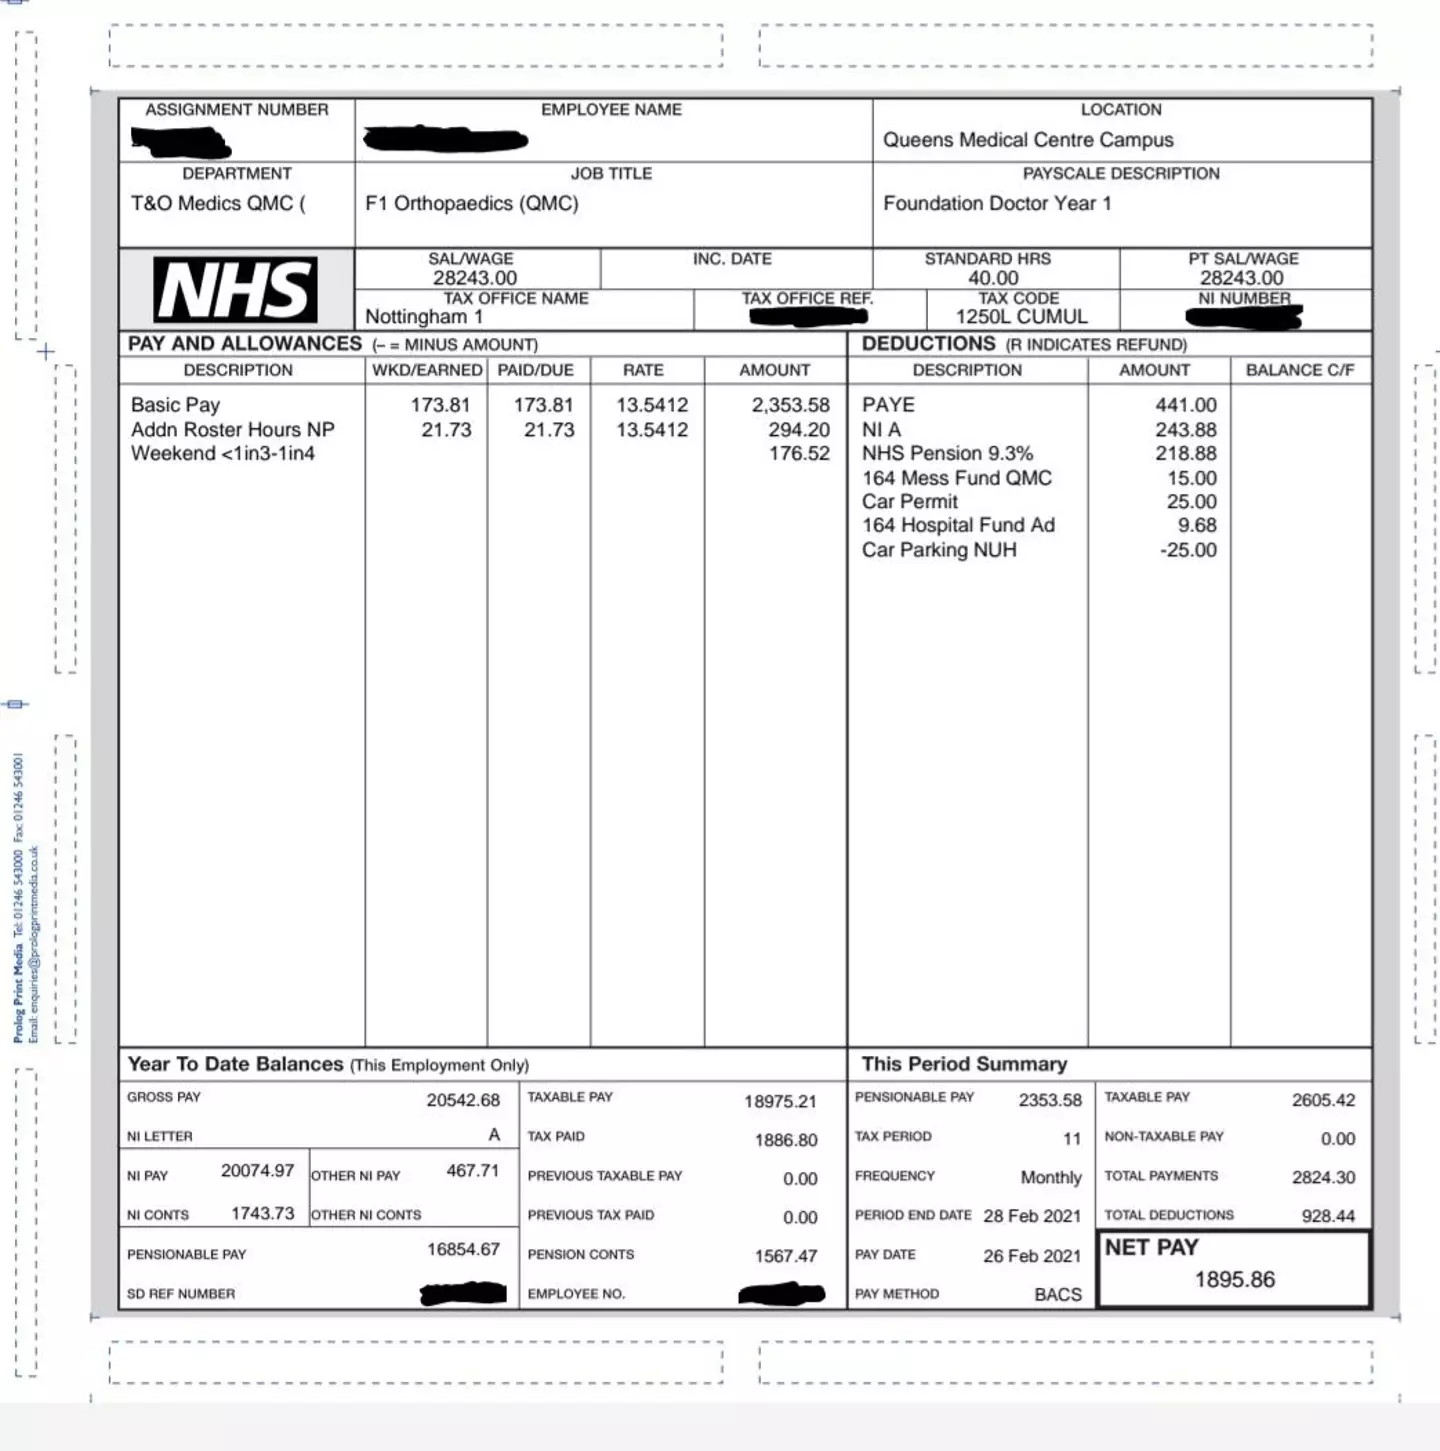 The F1 shared his payslip online.